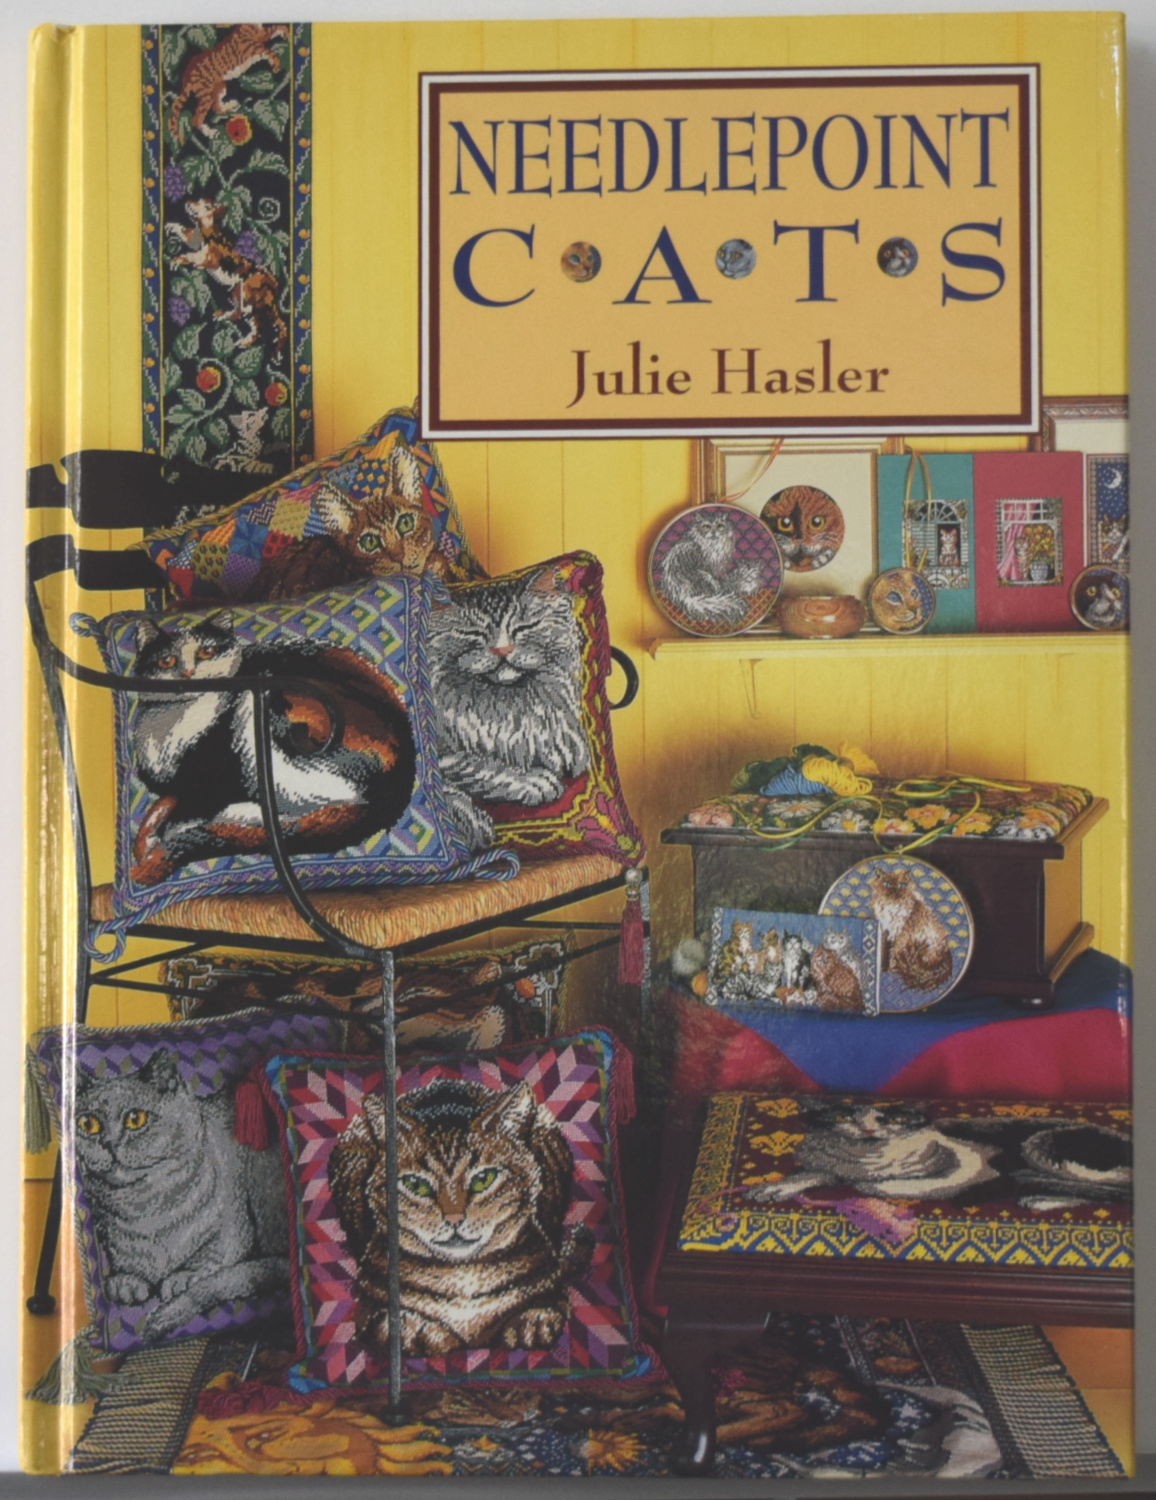 Needlepoint Cats by Julie Hasler